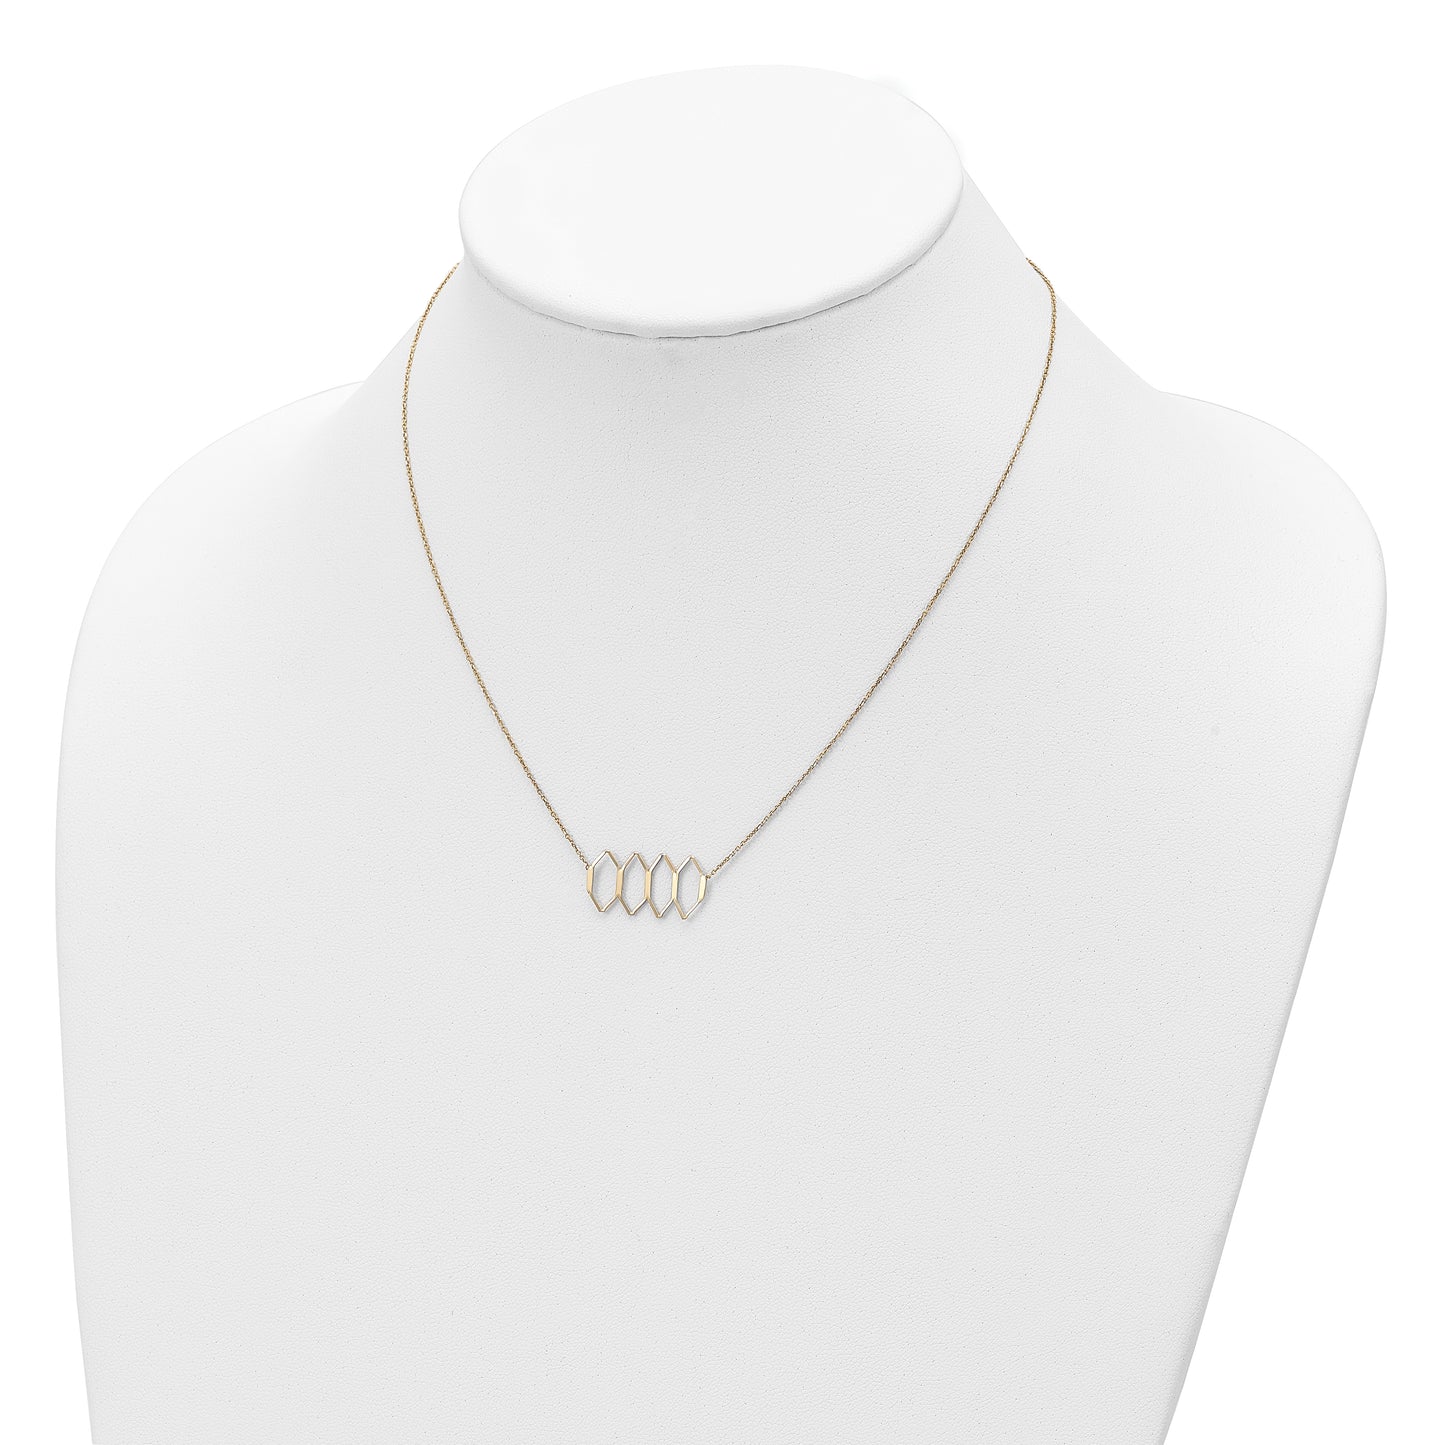 14K Polished Fancy Shapes w/2 in ext. Necklace